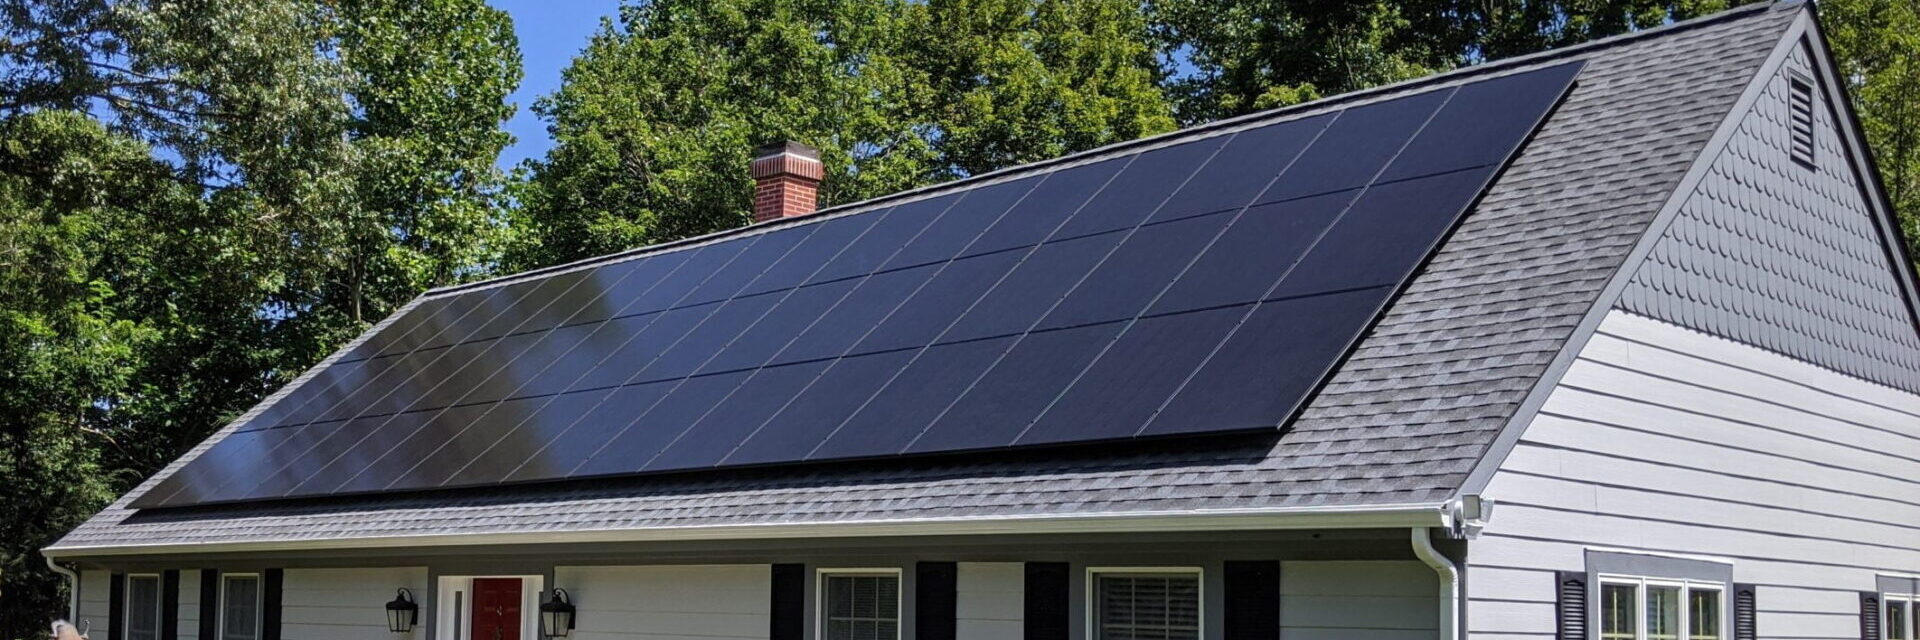 White house in Short Pump Virginia with rooftop solar panel system